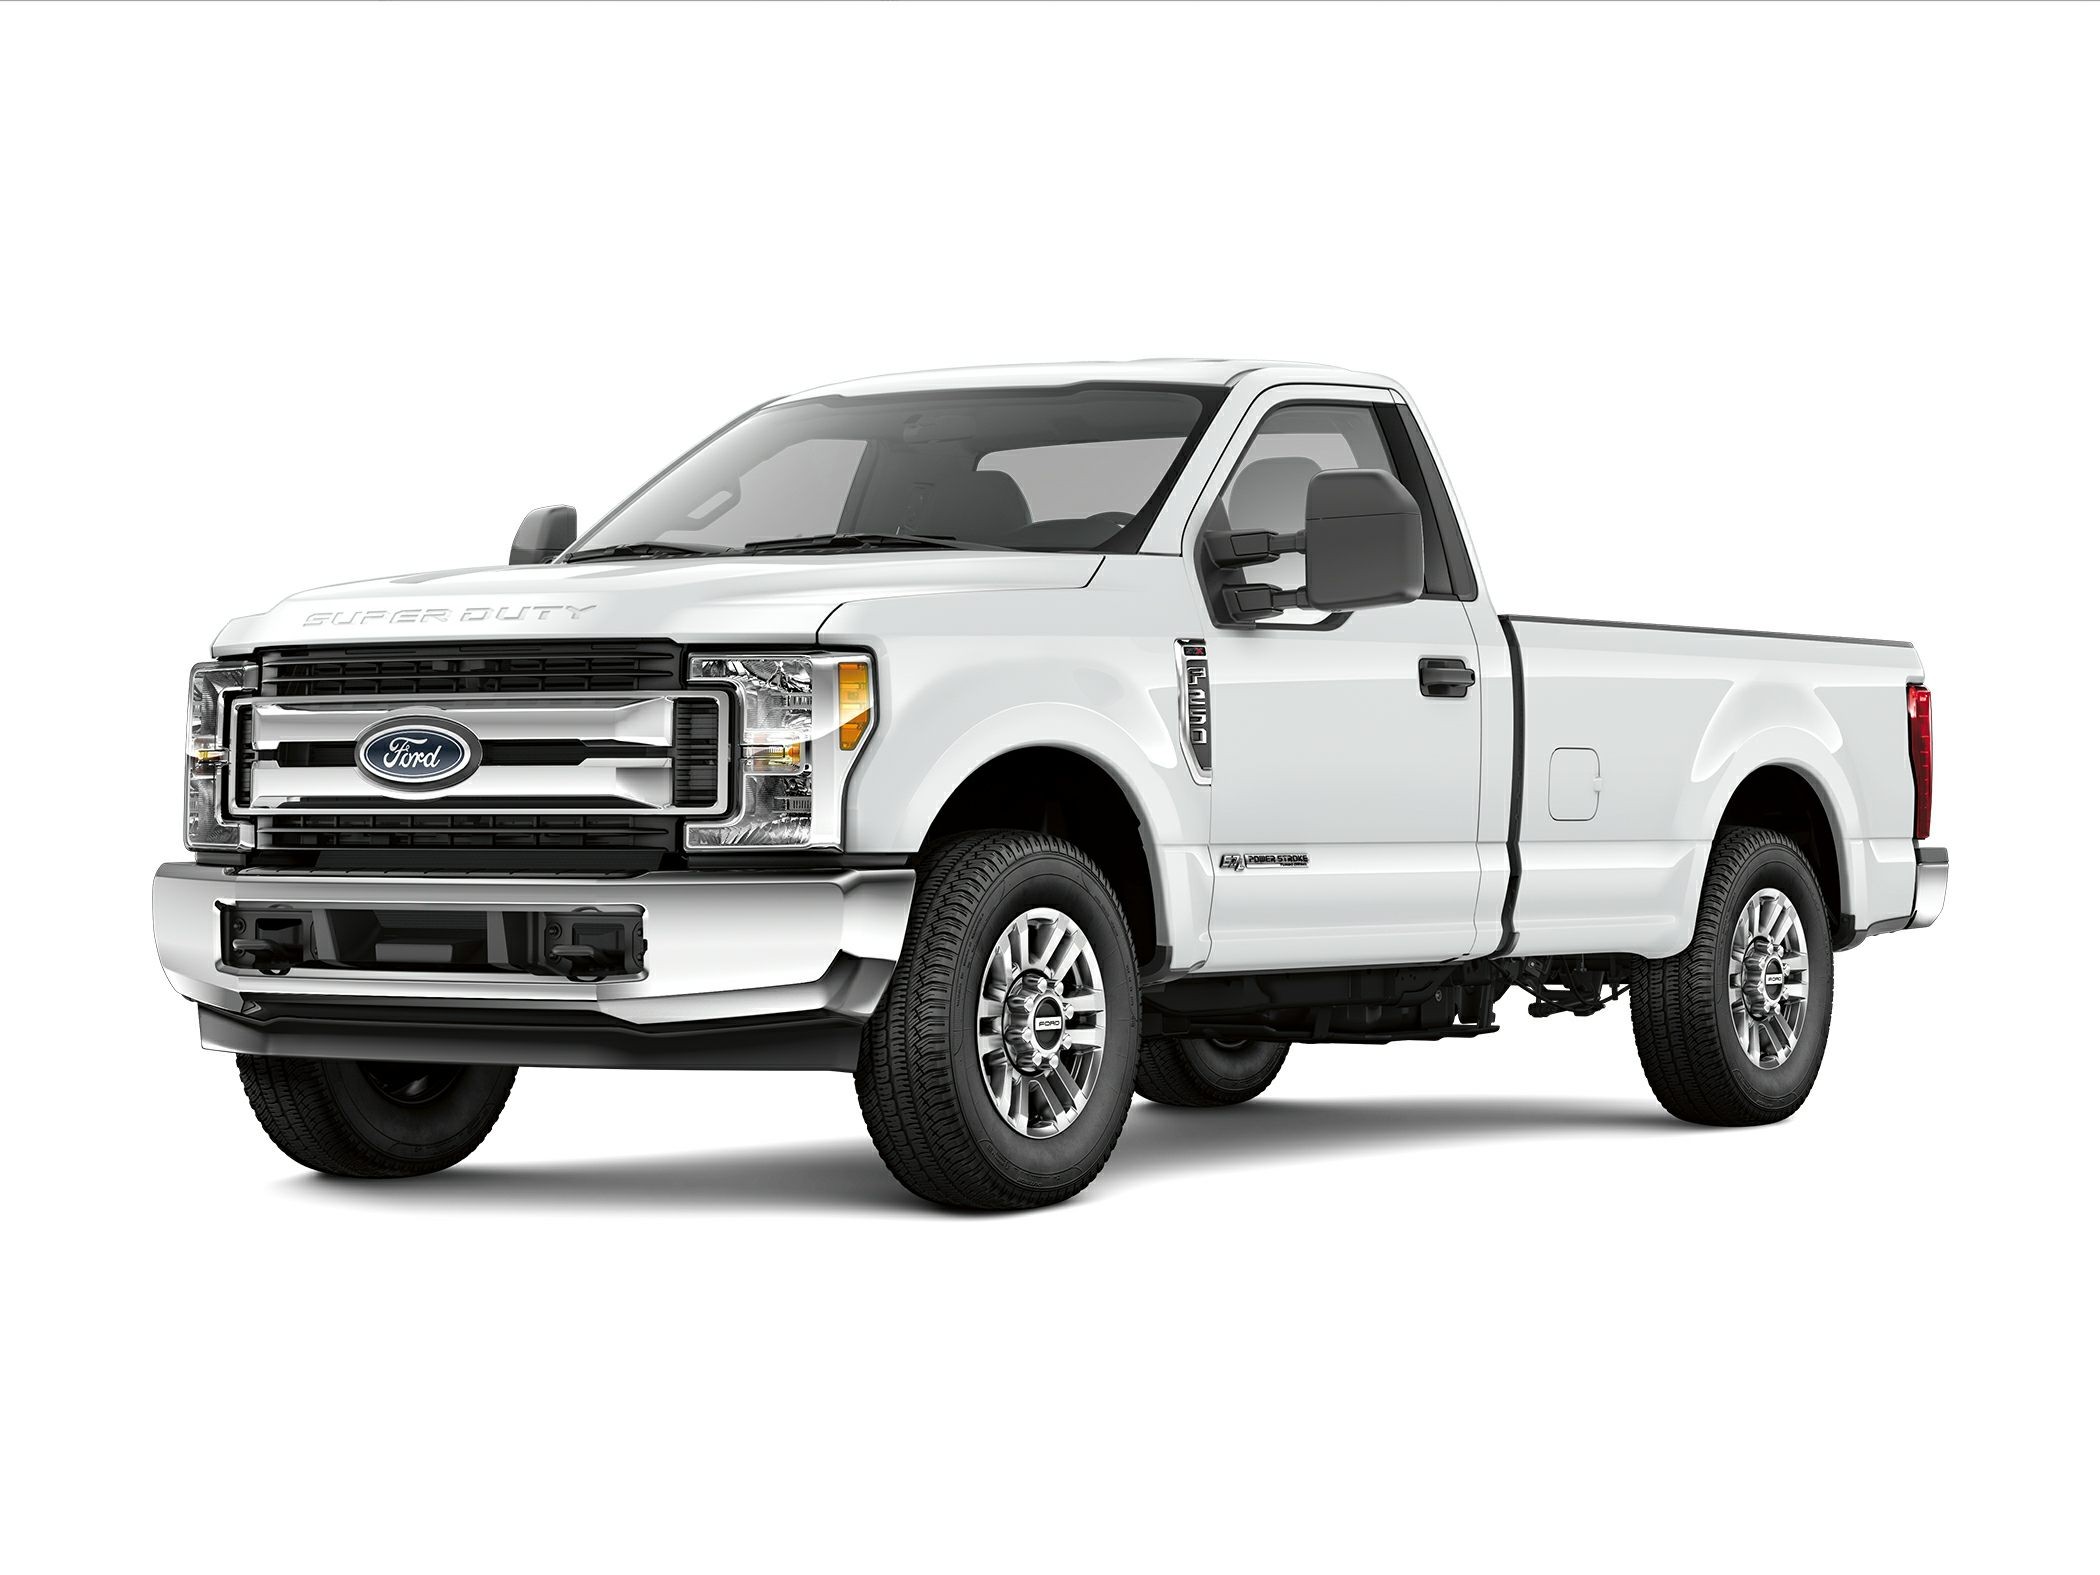 2018 FORD F-250